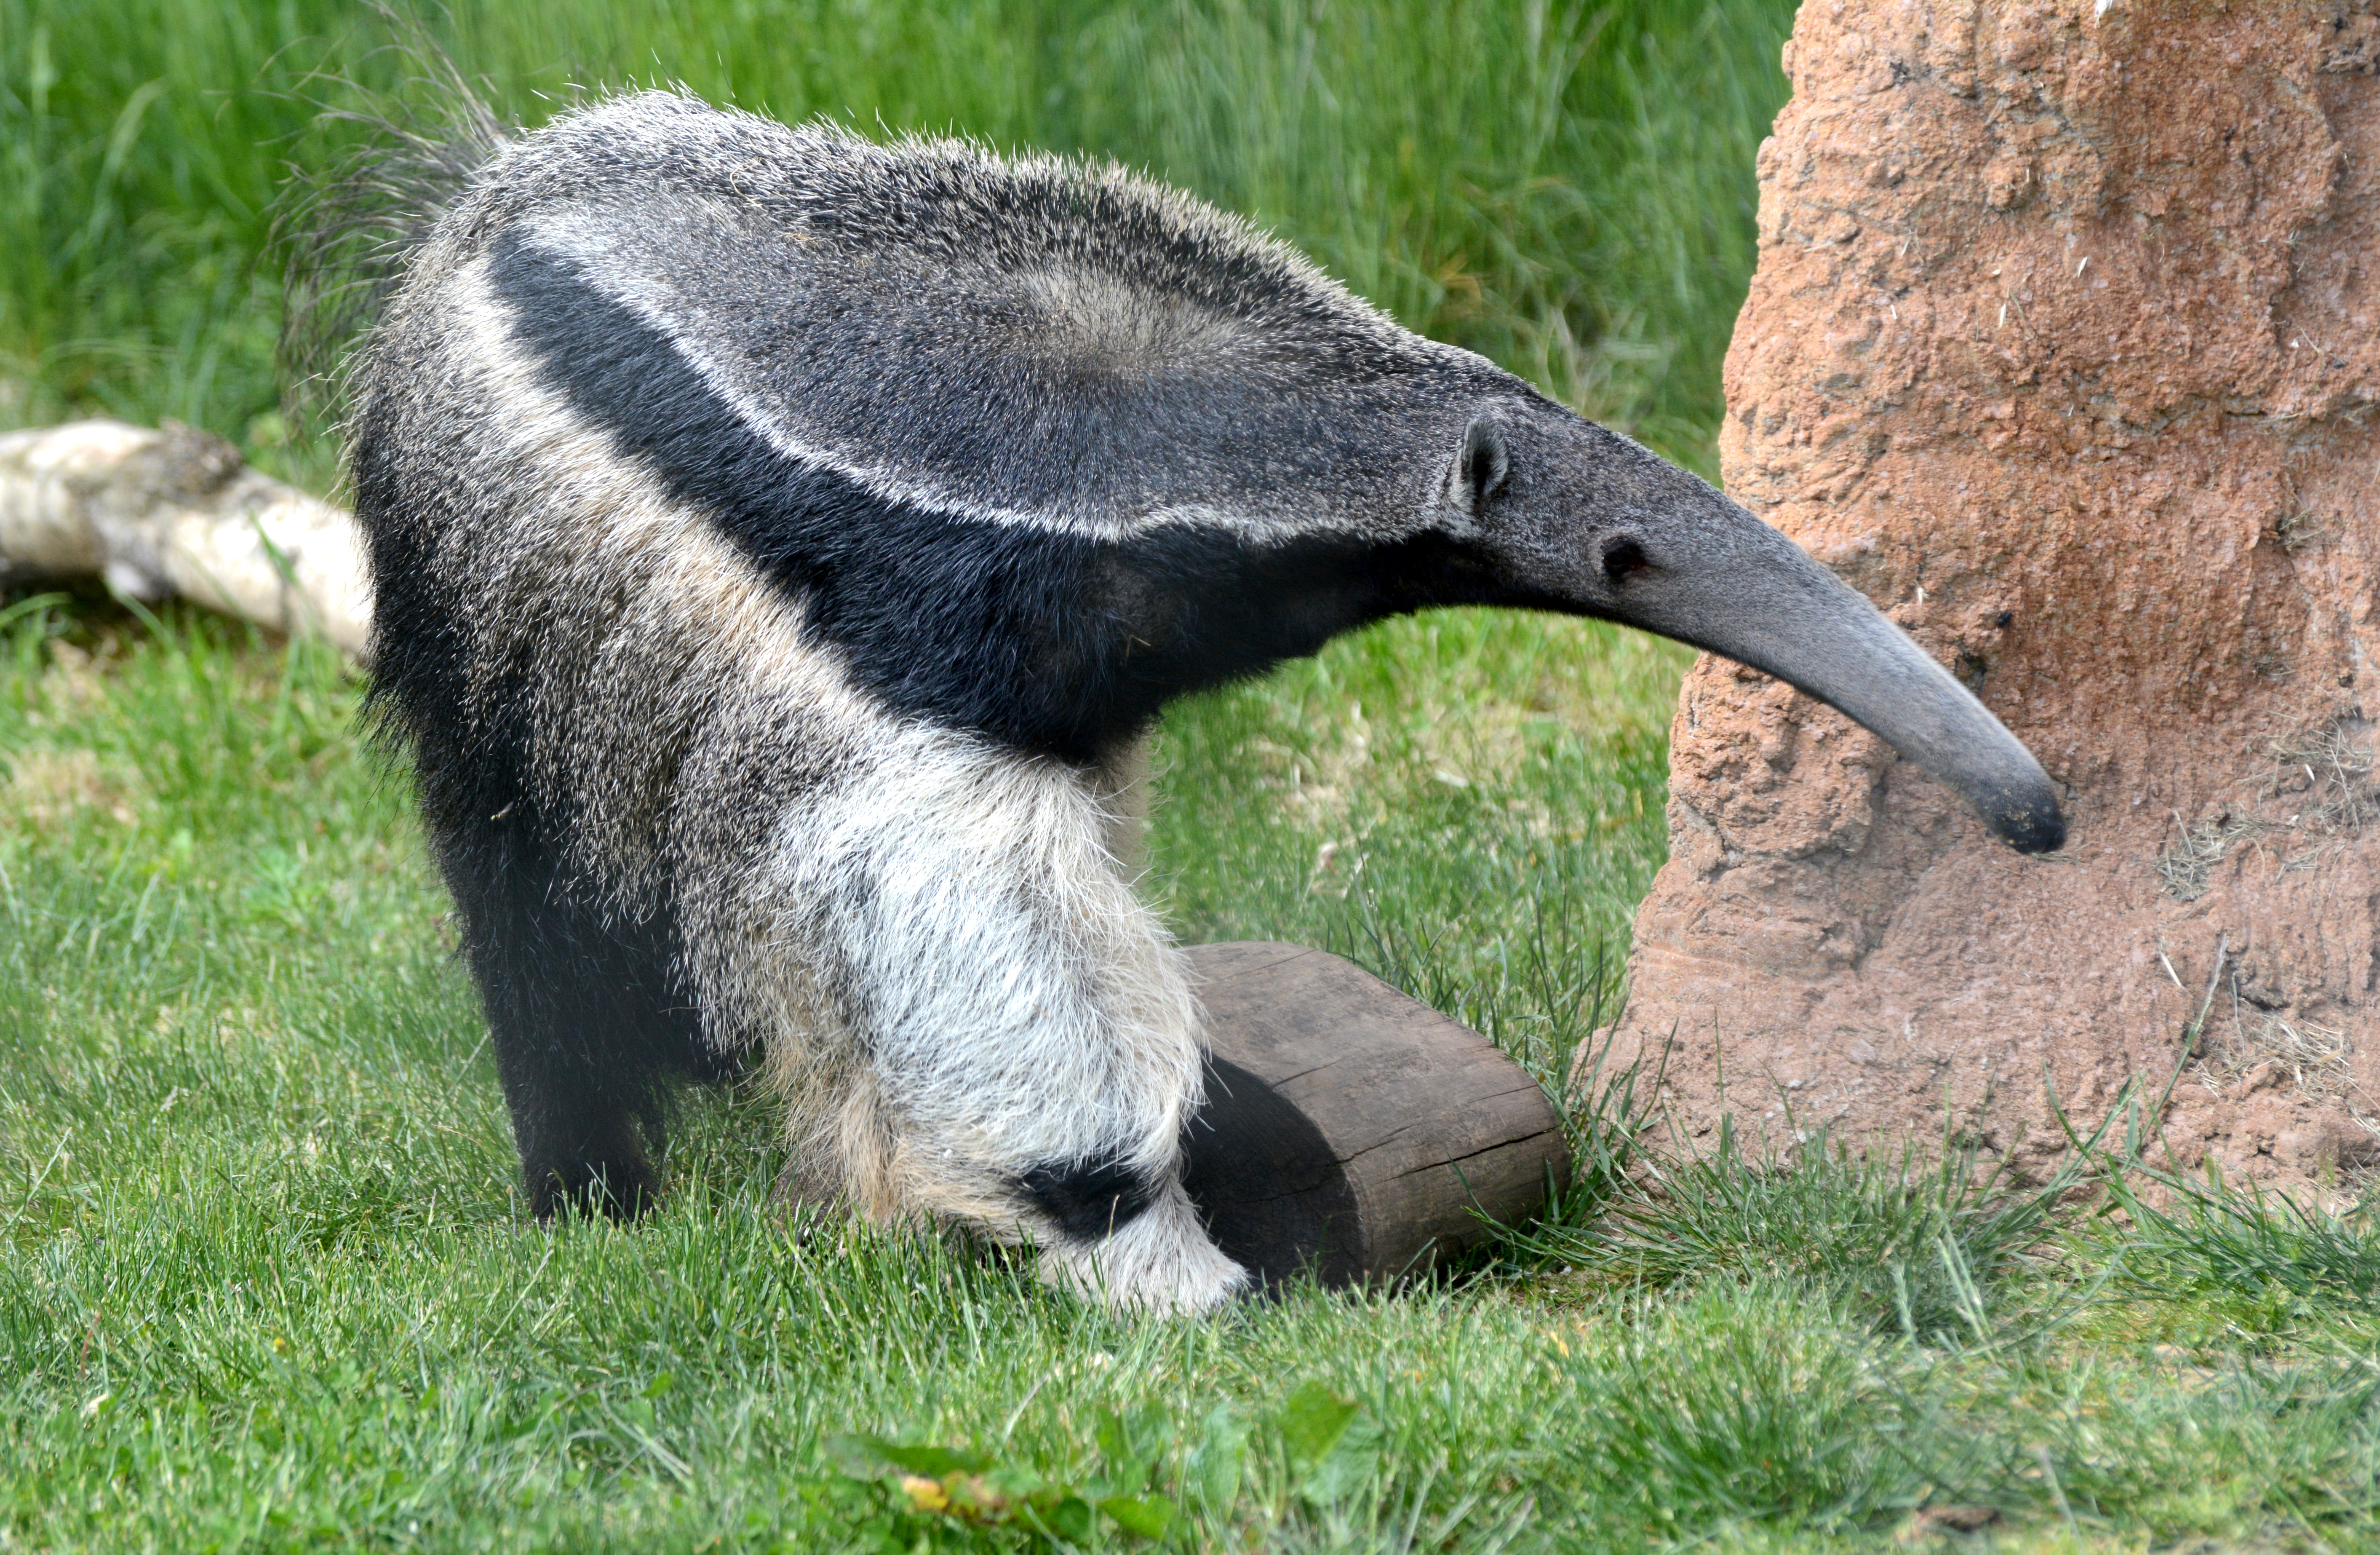 Giant Anteaters at Yorkshire Wildlife Park